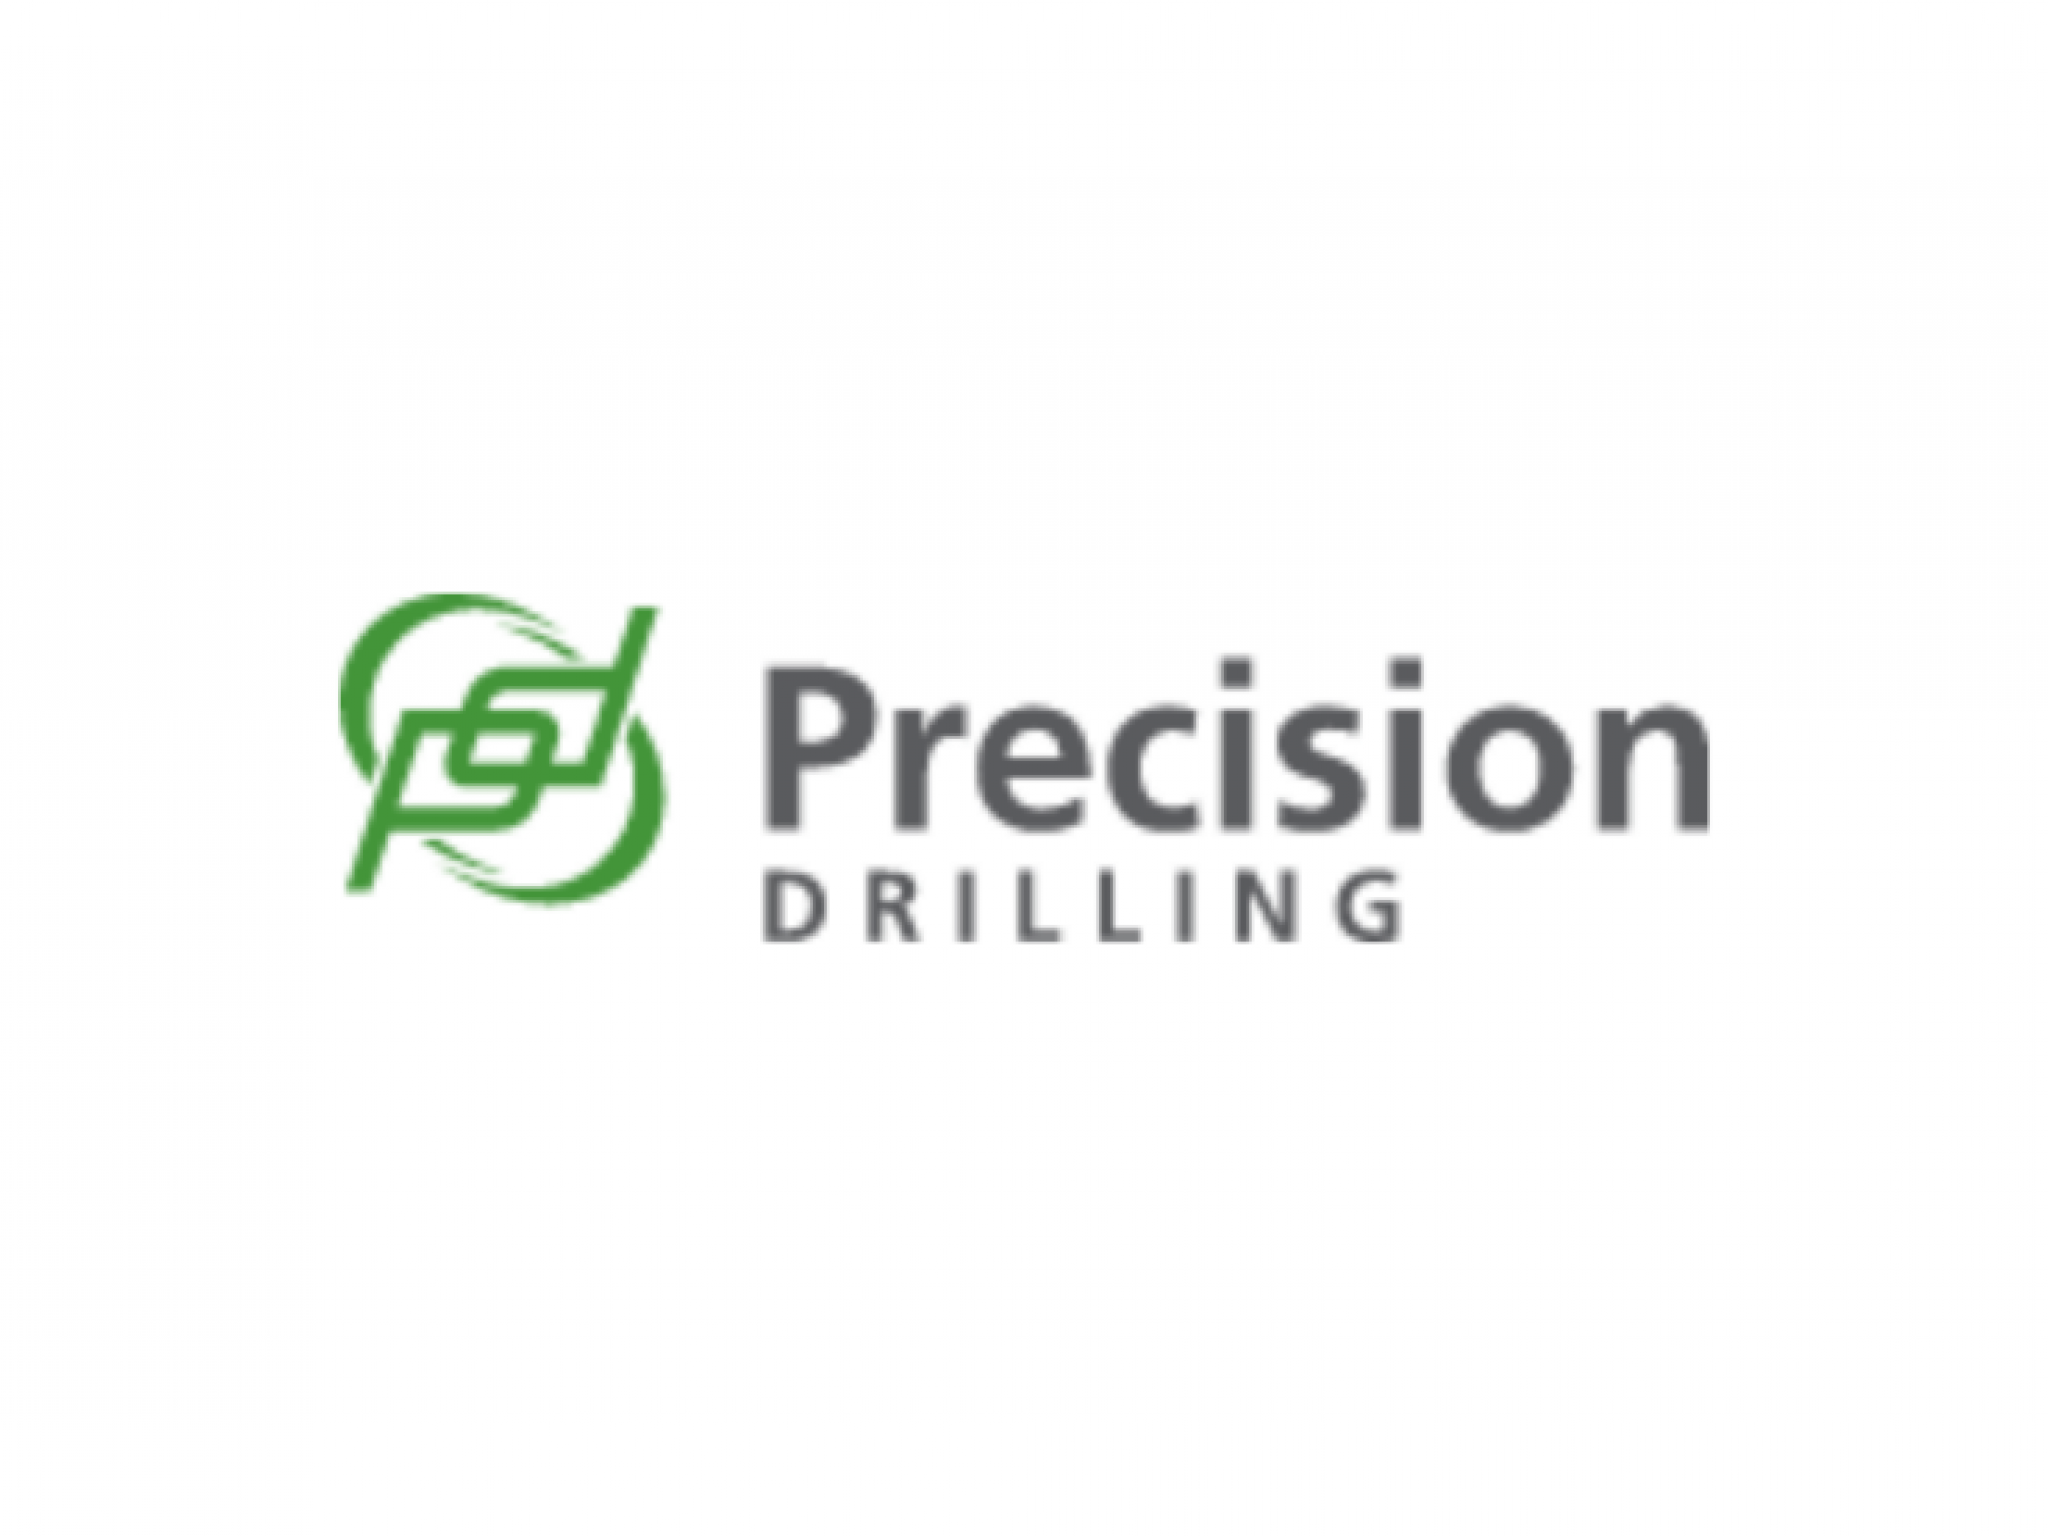  precision-drilling-shares-are-rocketing-today-whats-going-on 